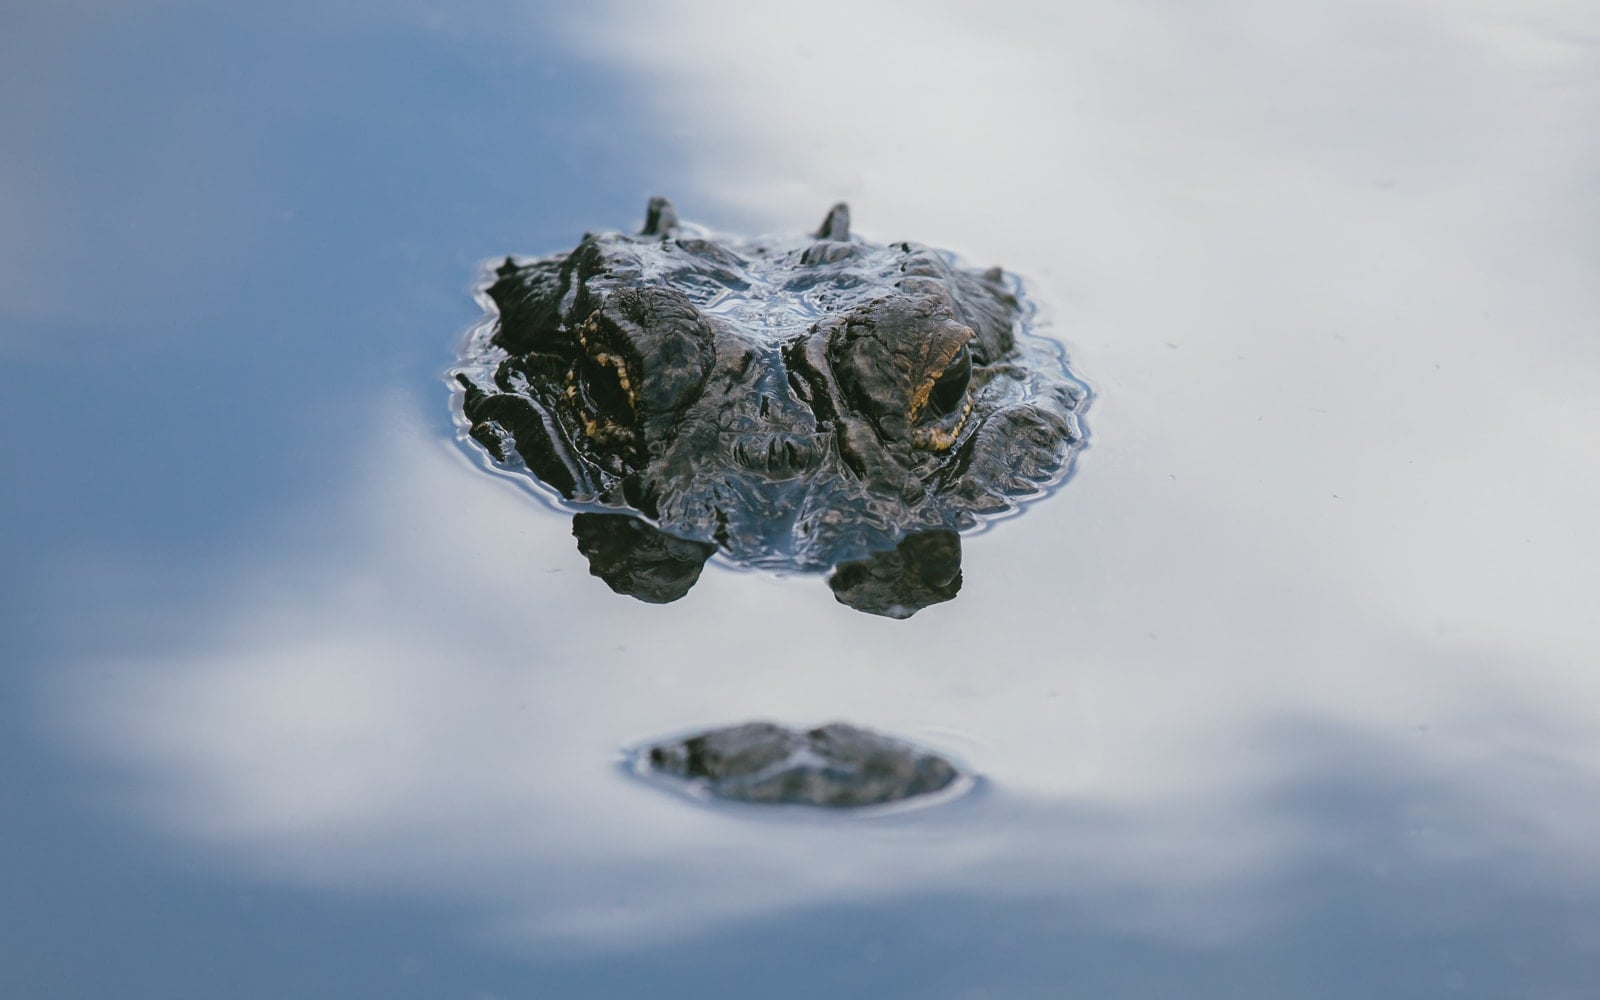 An alligator peeking above the water in the Florida Everglades. 2020 Best Photos.